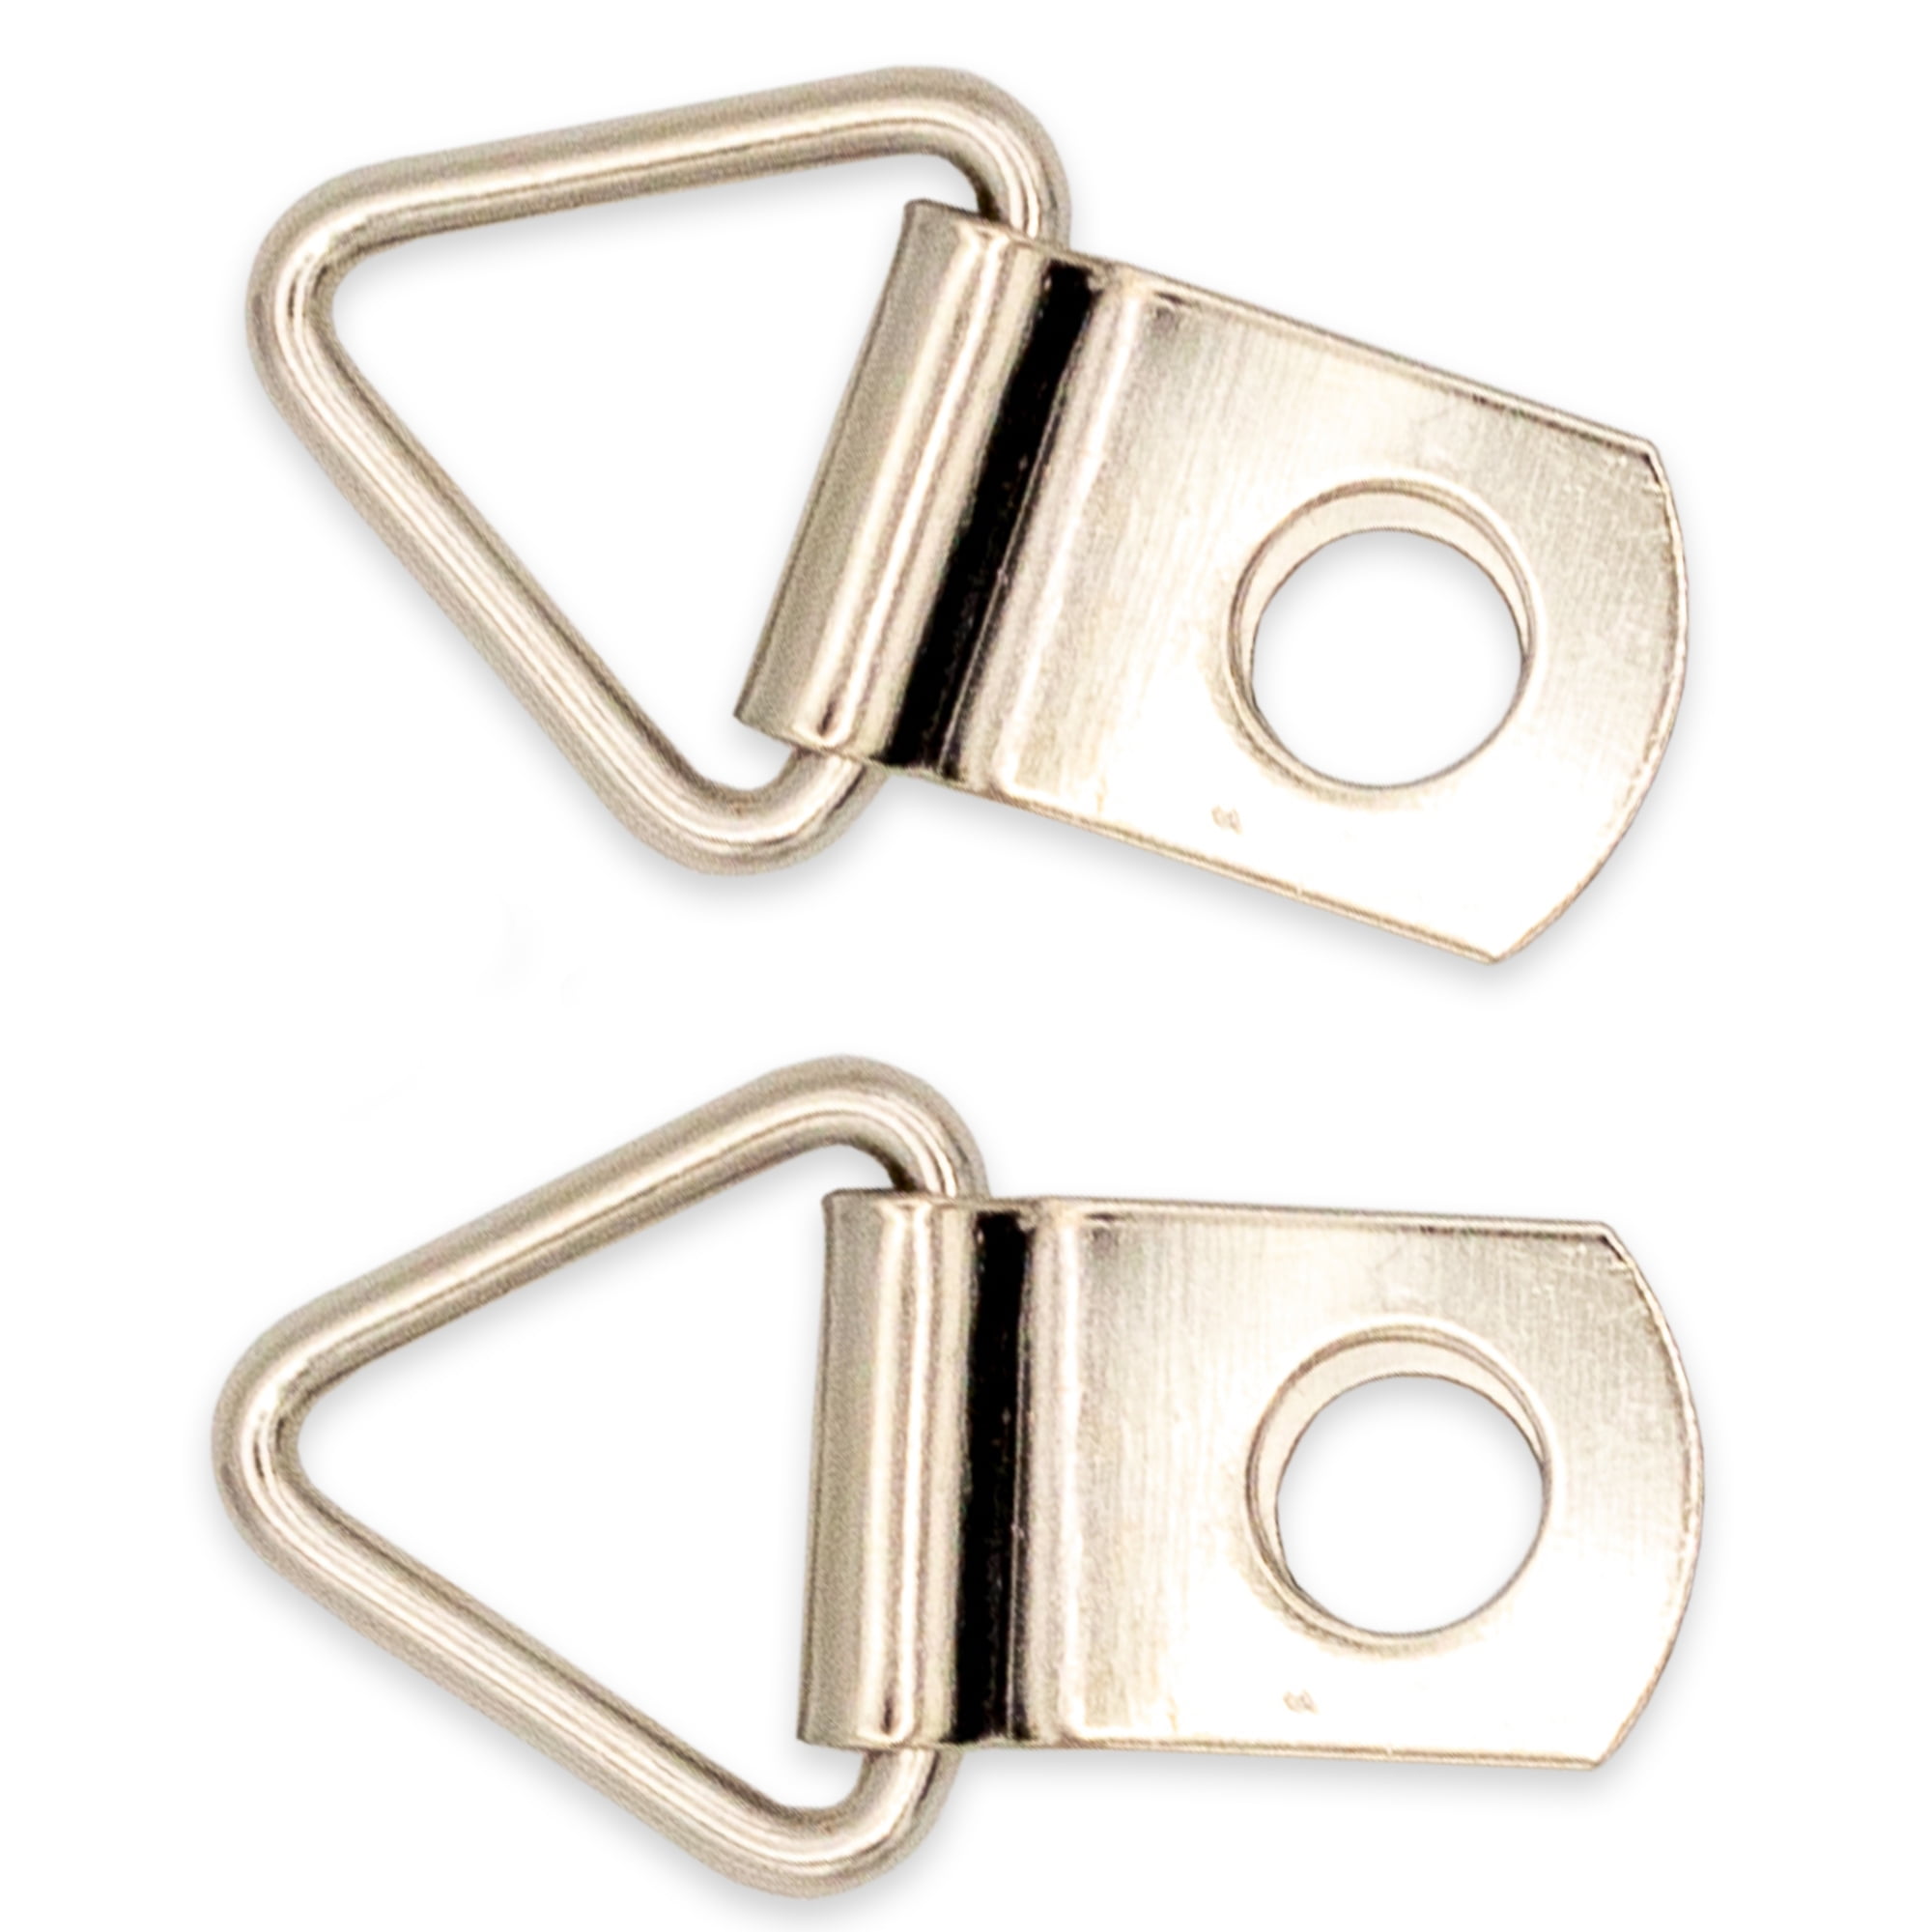 100 1 1/8 Triangle D Ring Strap Picture Hangers Zinc Plated 